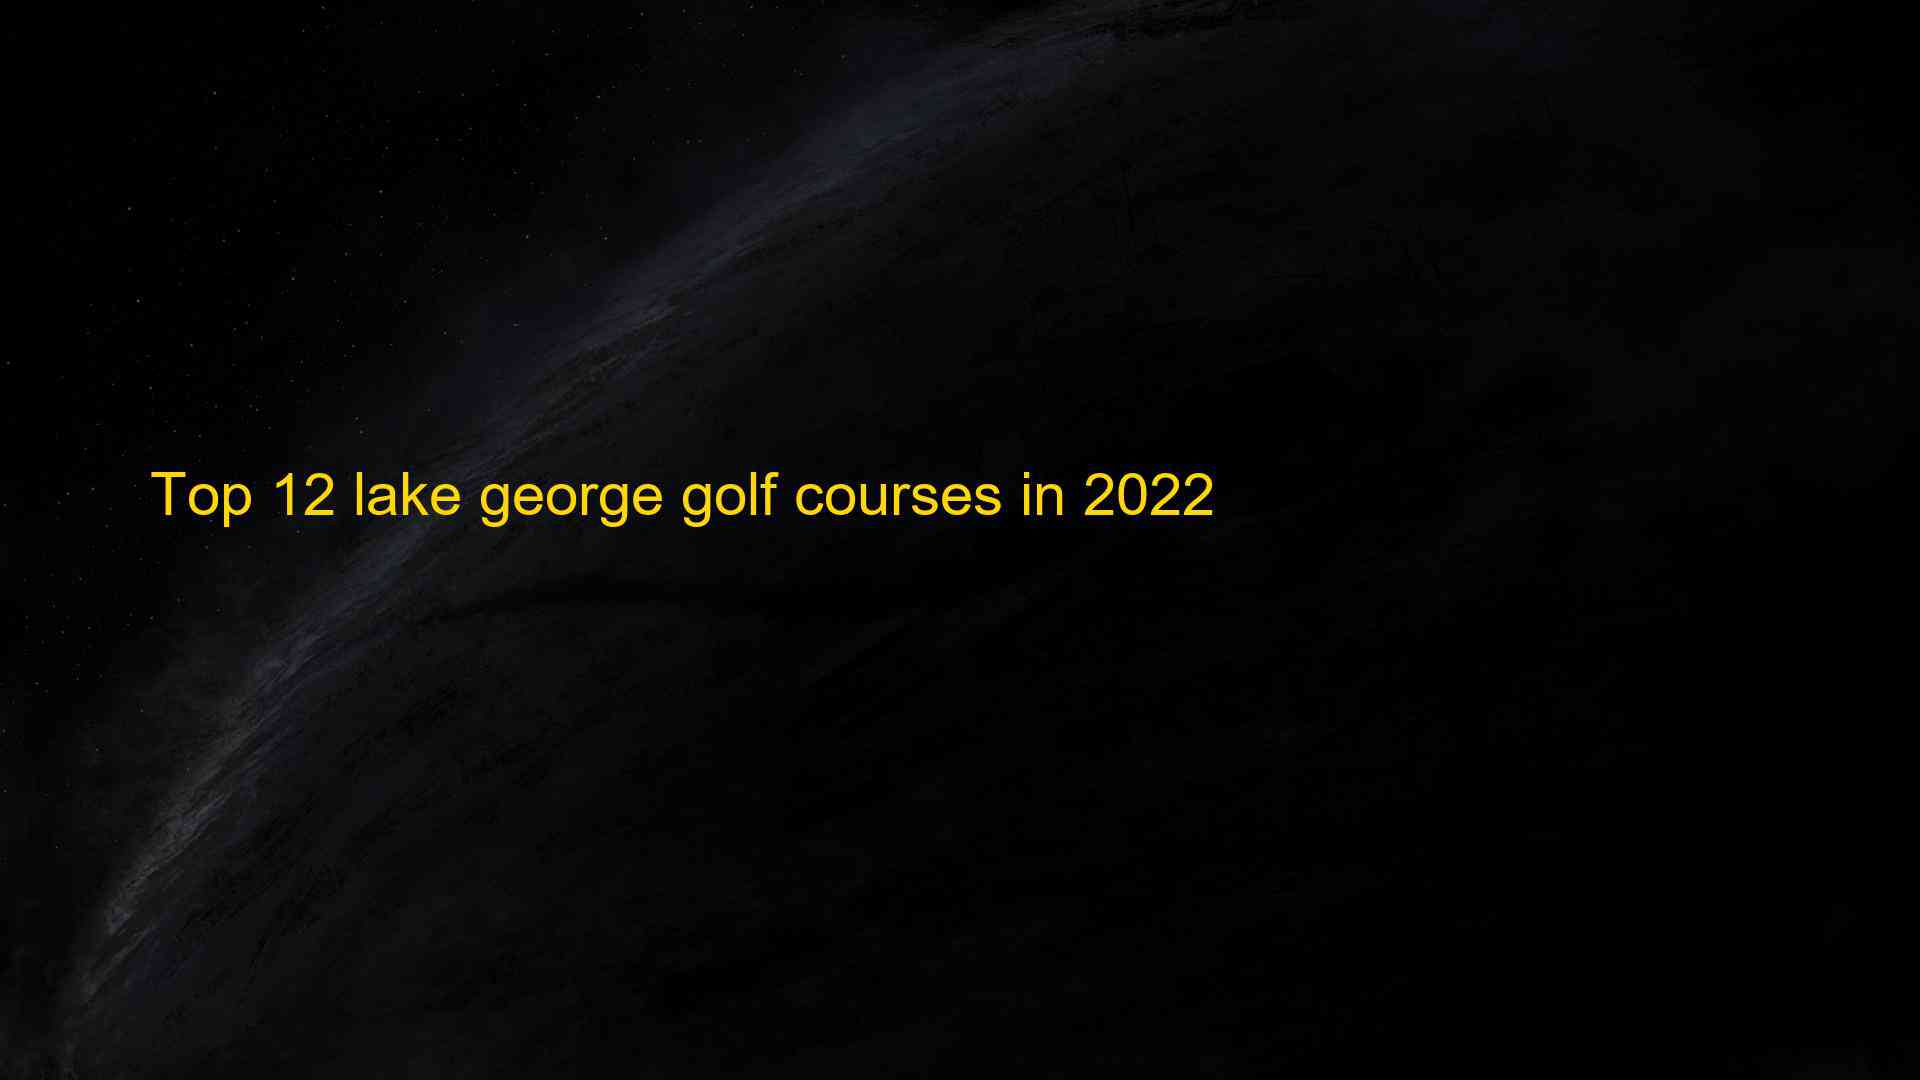 Top 12 lake george golf courses in 2022 1661822065